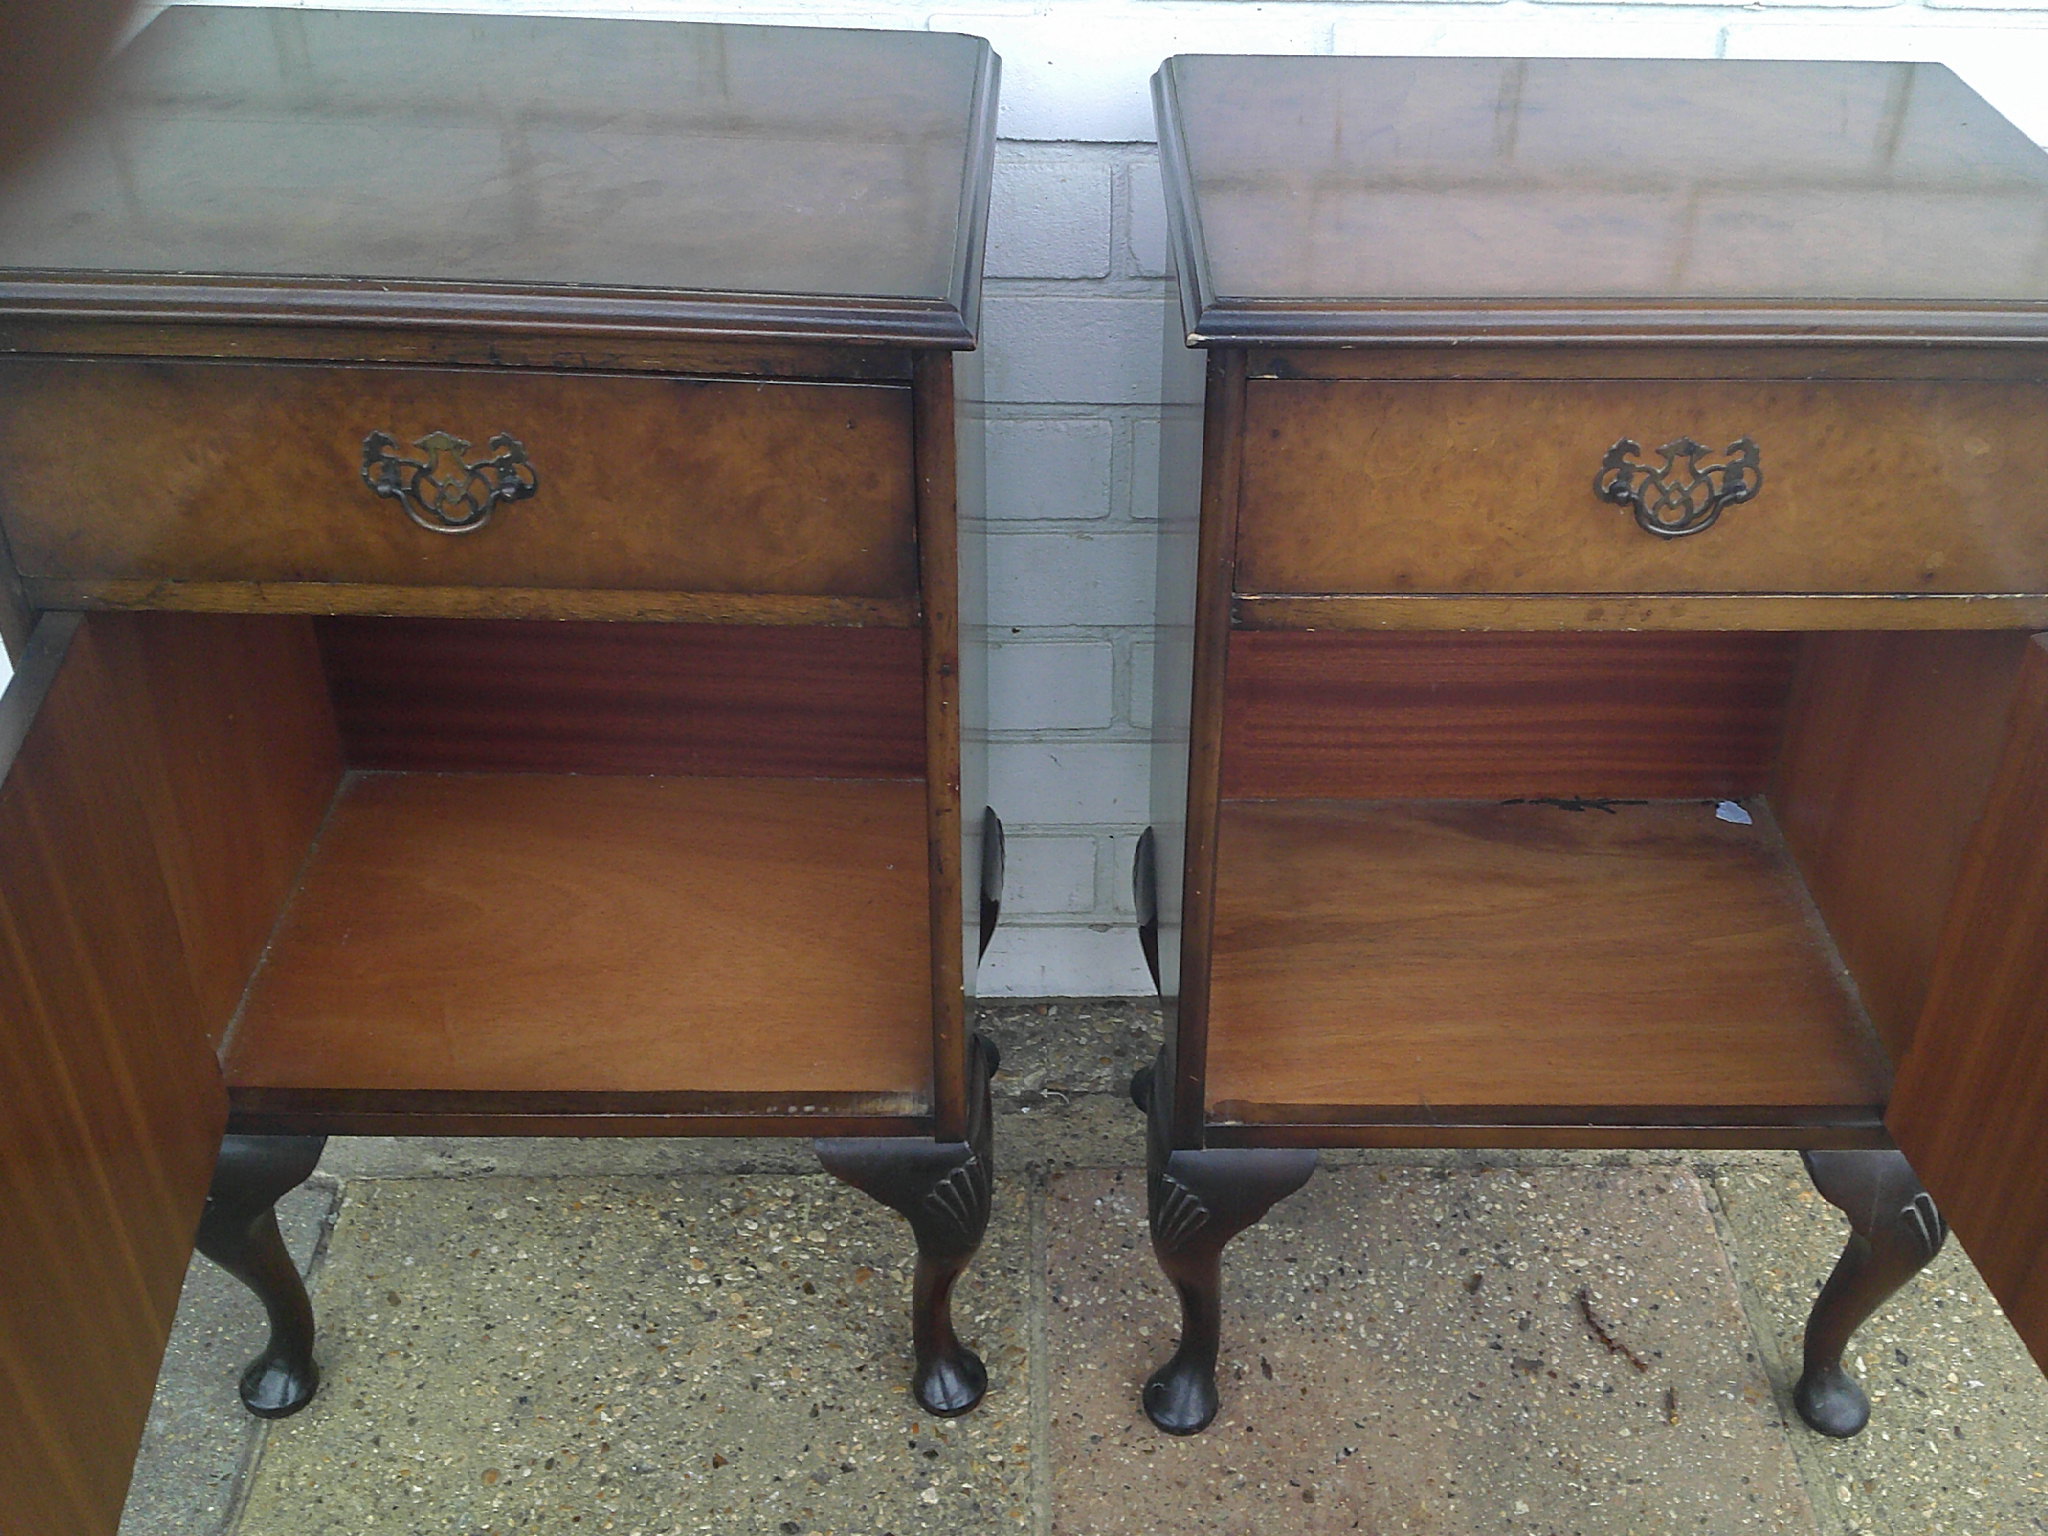 PAIR OF ANTIQUE WALNUT BEDSIDE CABINETS